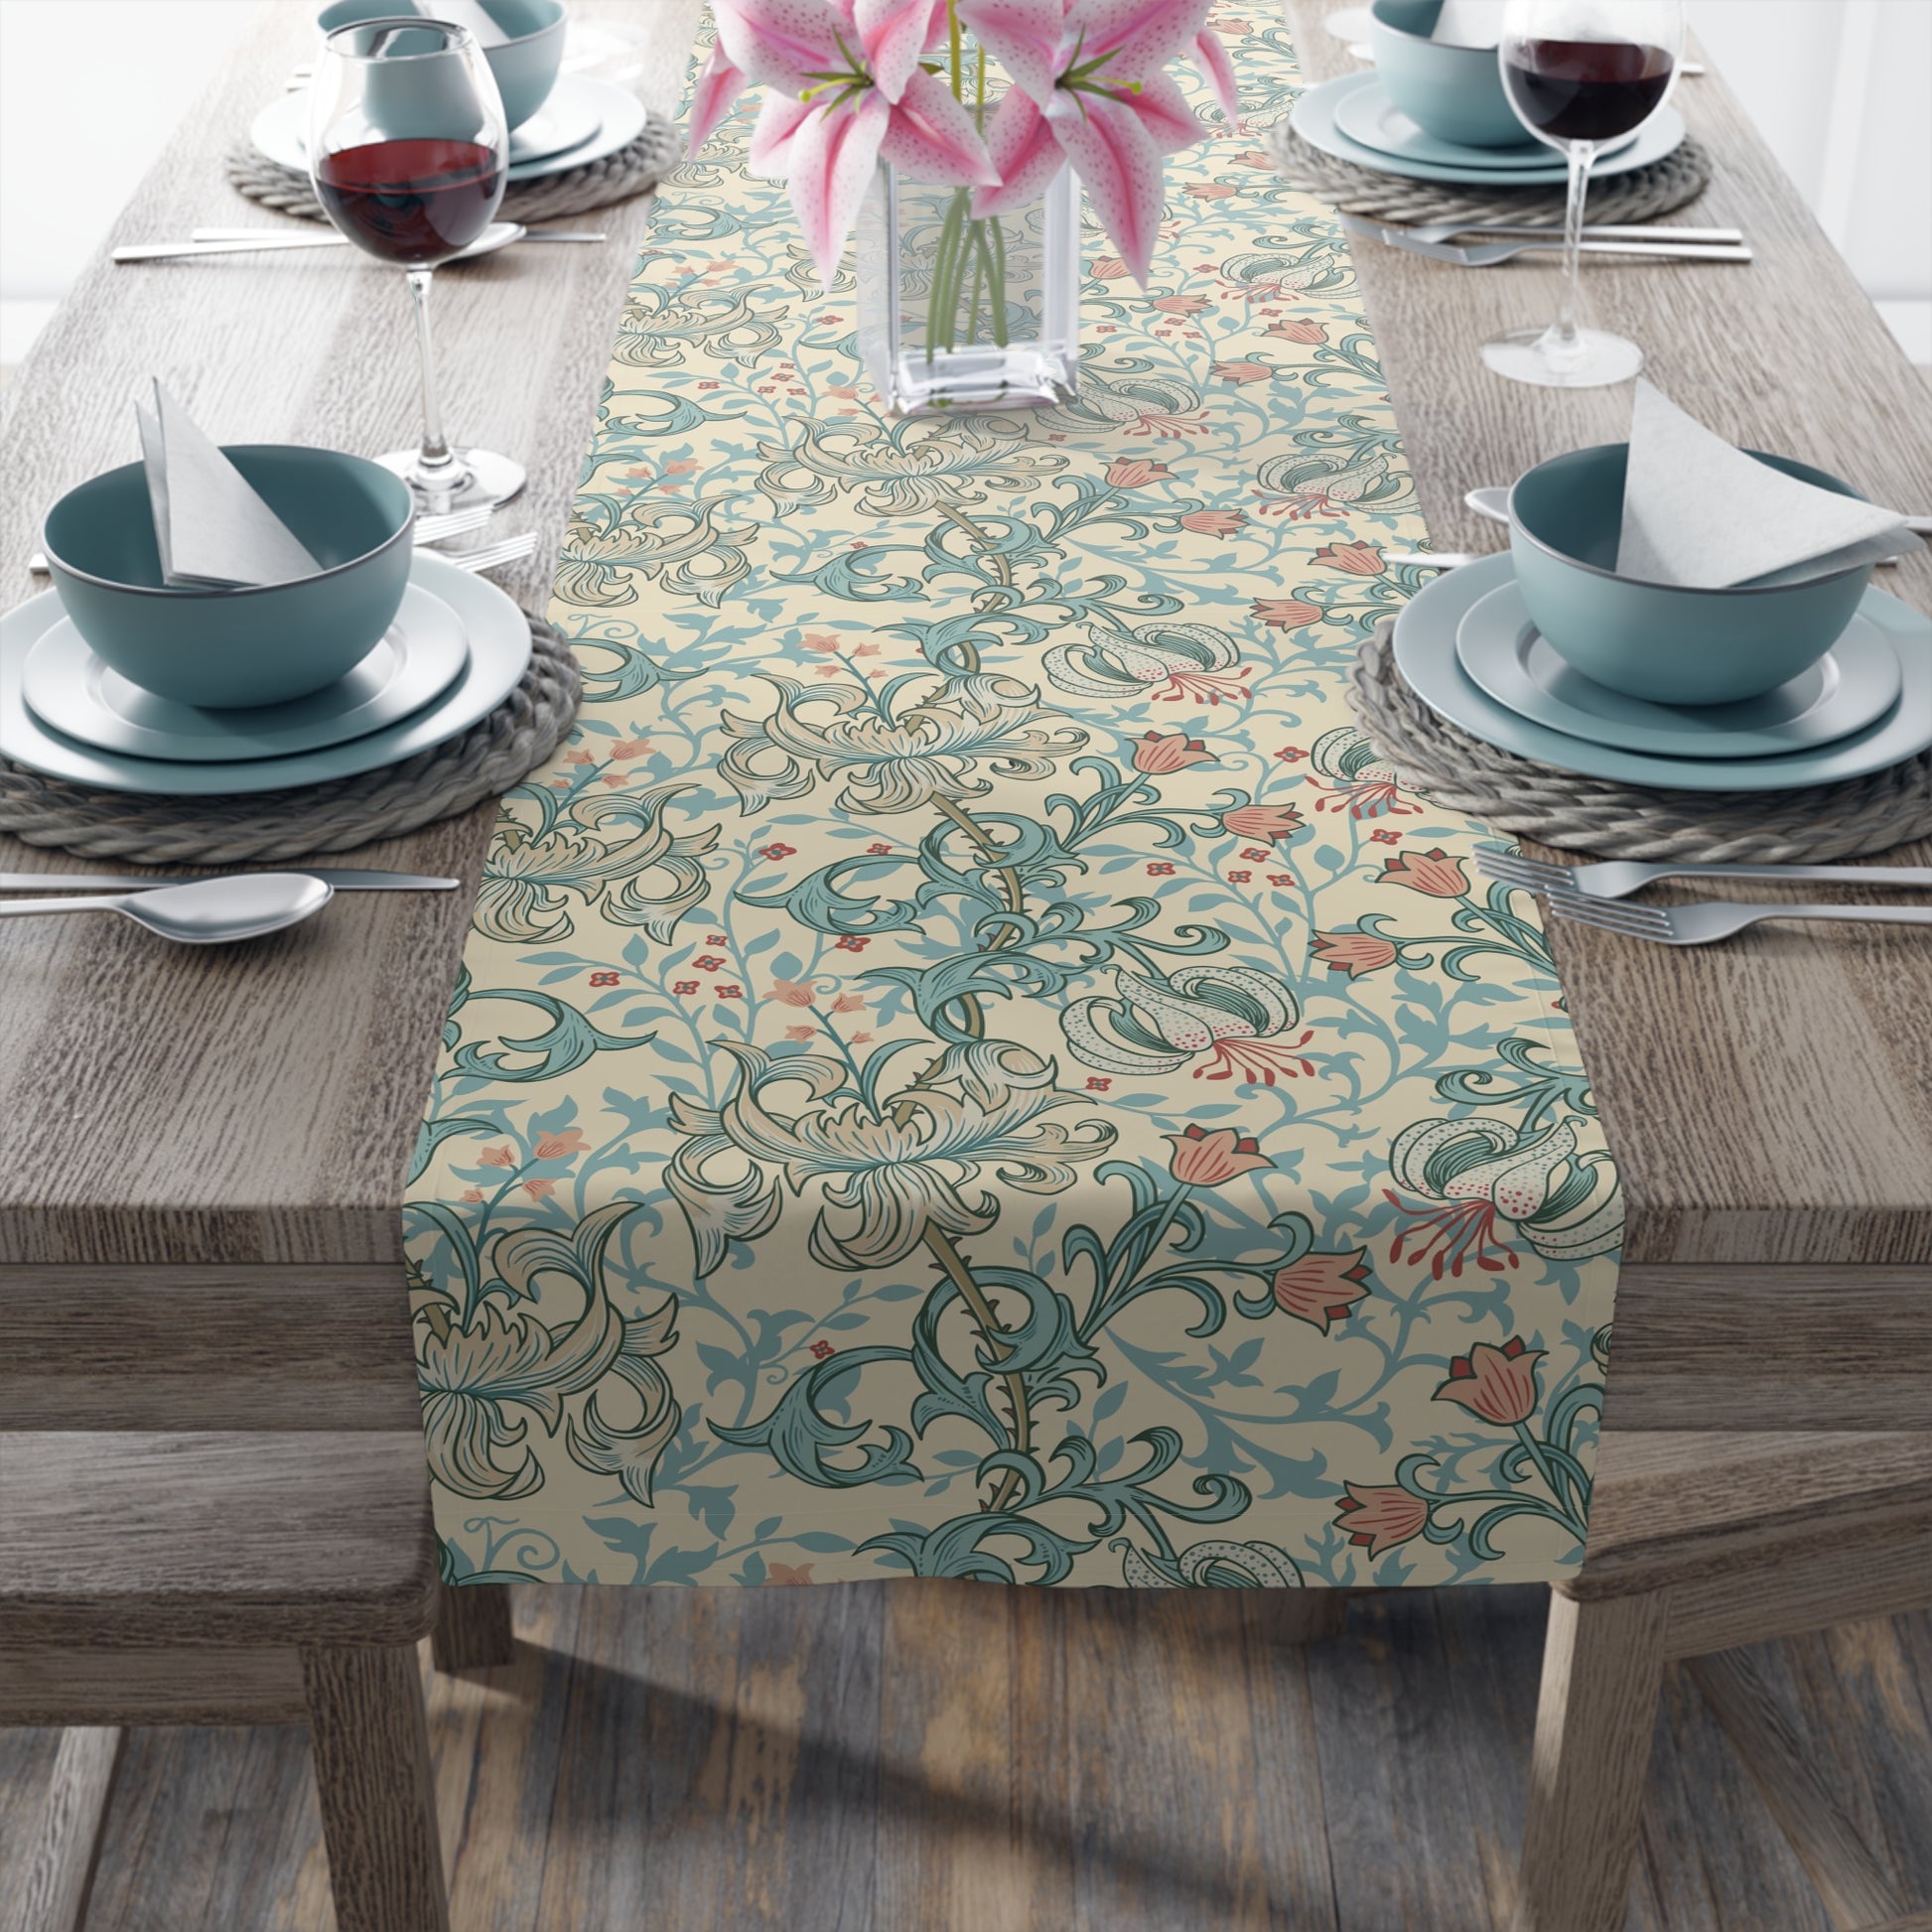 william-morris-co-table-runner-golden-lily-collection-mineral-8